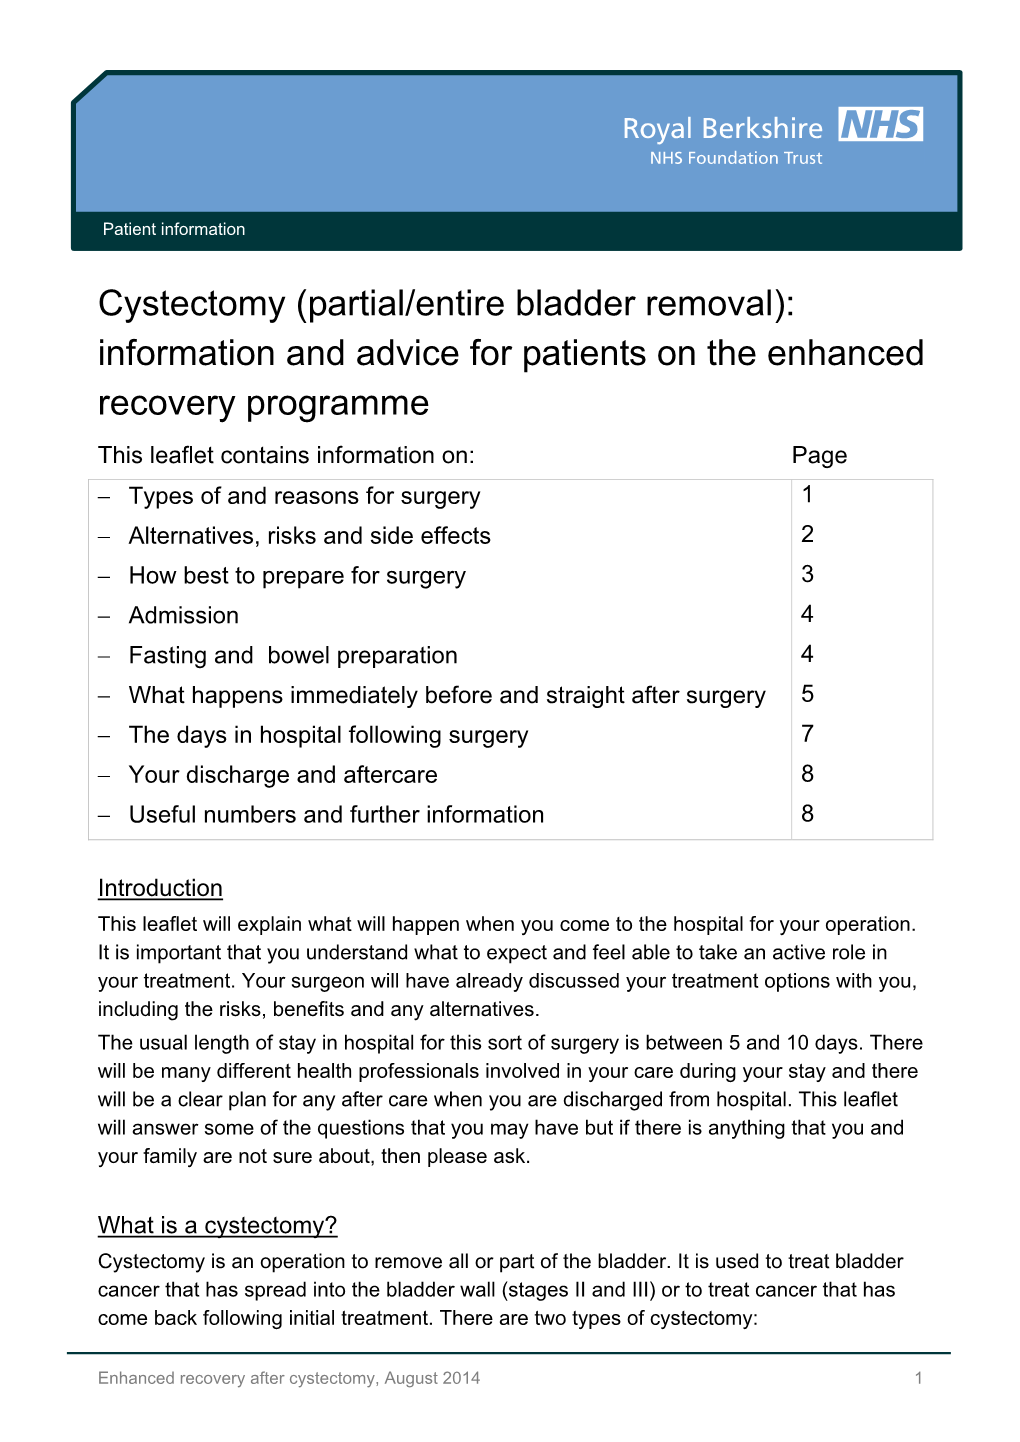 Cystectomy (Partial/Entire Bladder Removal): Information and Advice For